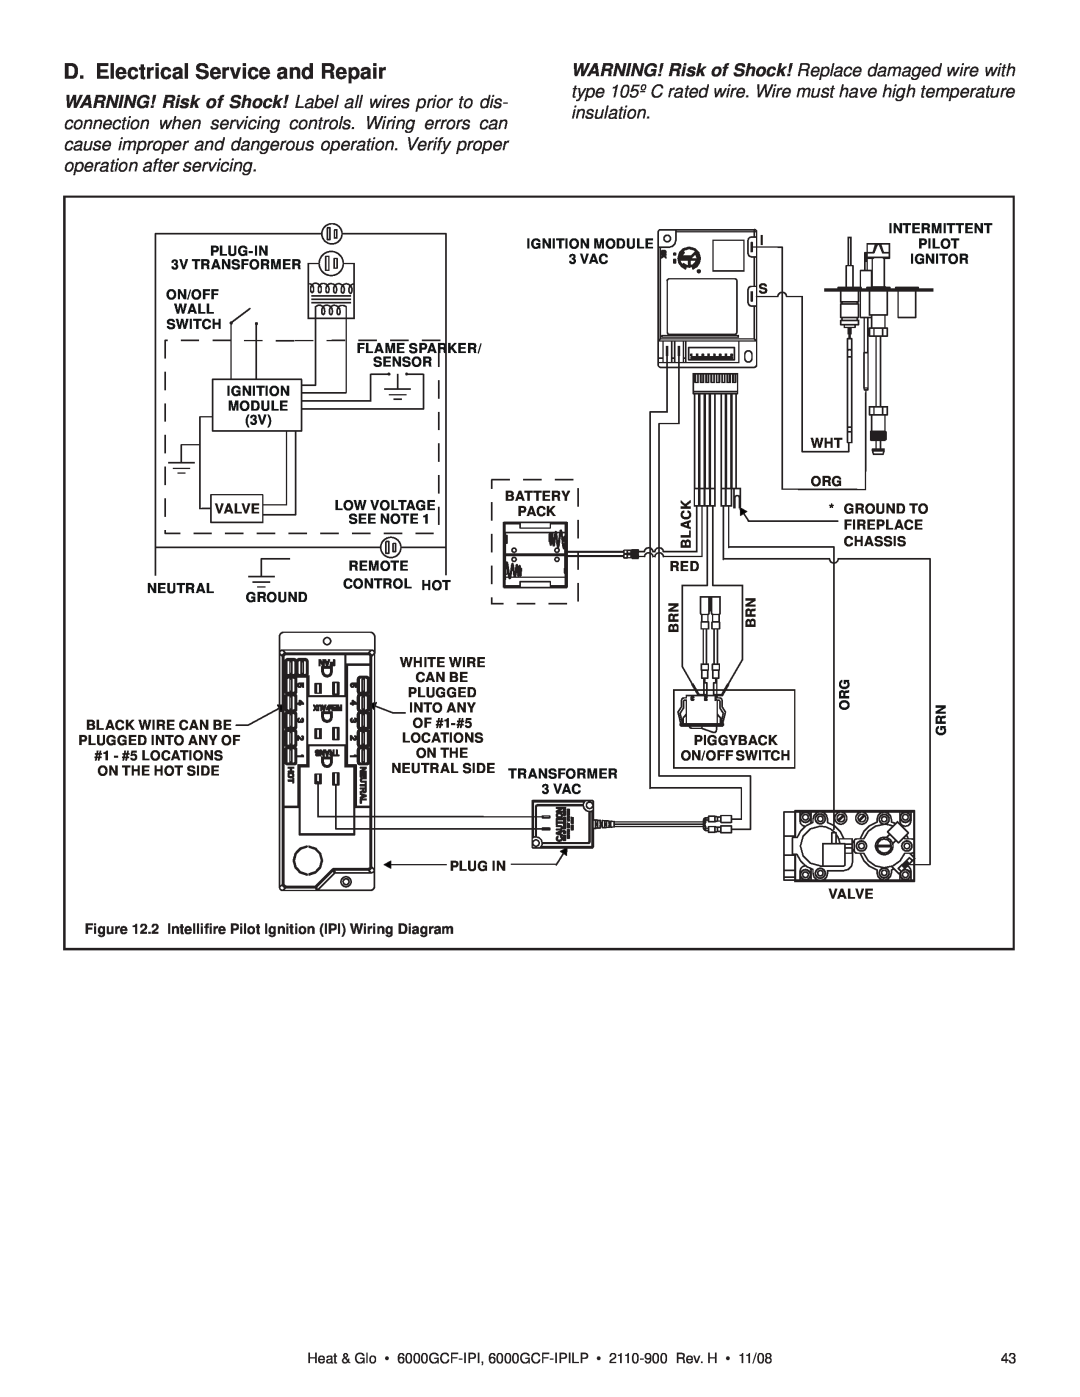 Hearth and Home Technologies 6000GCF-IPI D. Electrical Service and Repair, 2 Intelliﬁre Pilot Ignition IPI Wiring Diagram 